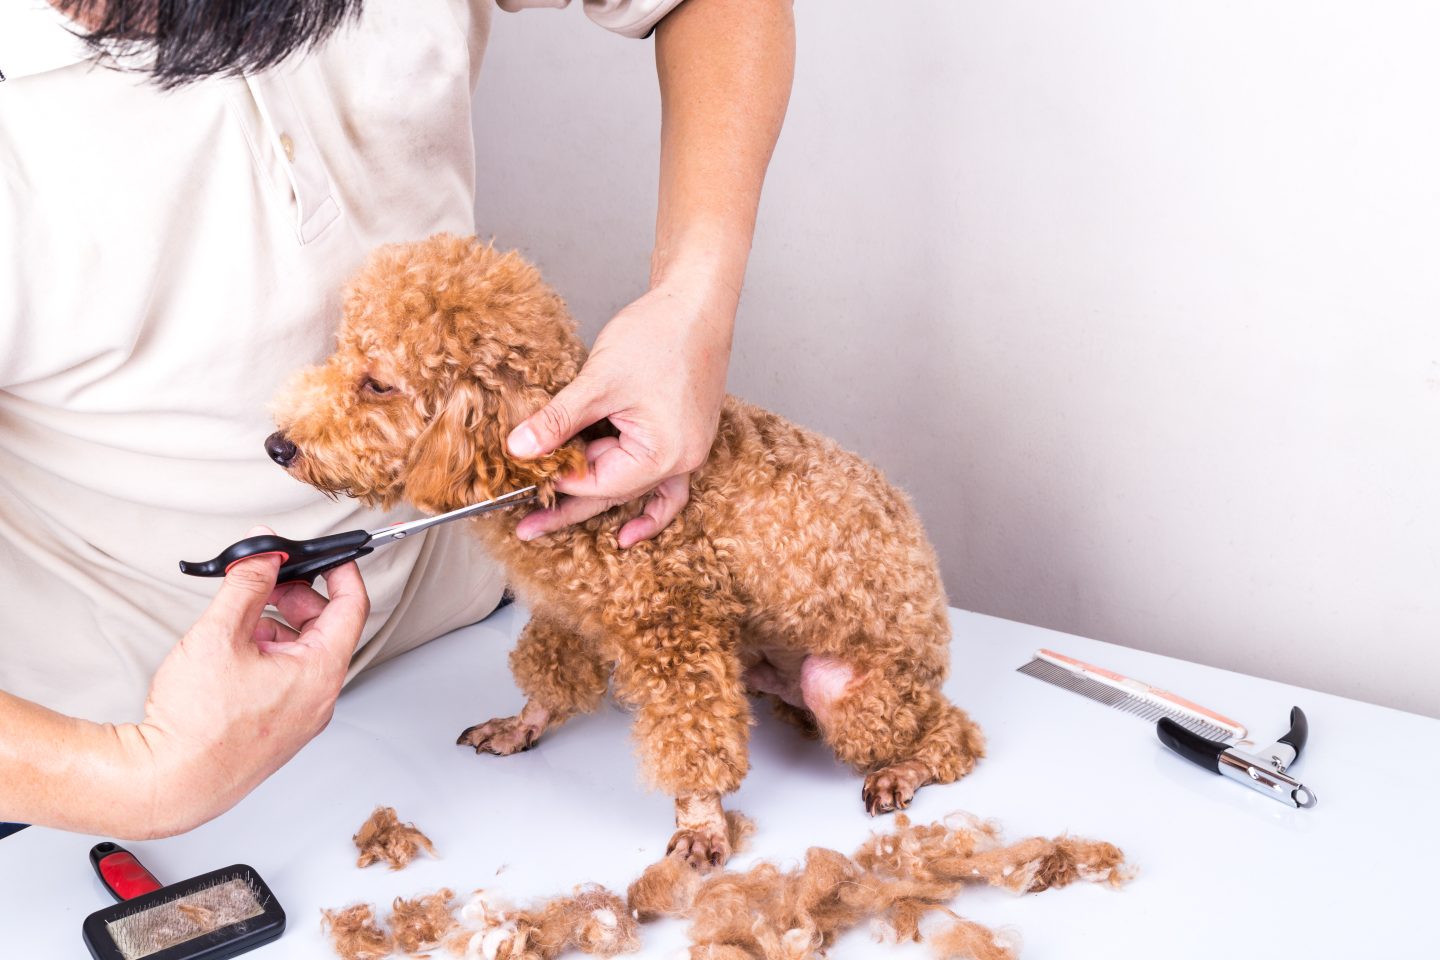 How to groom a poodle